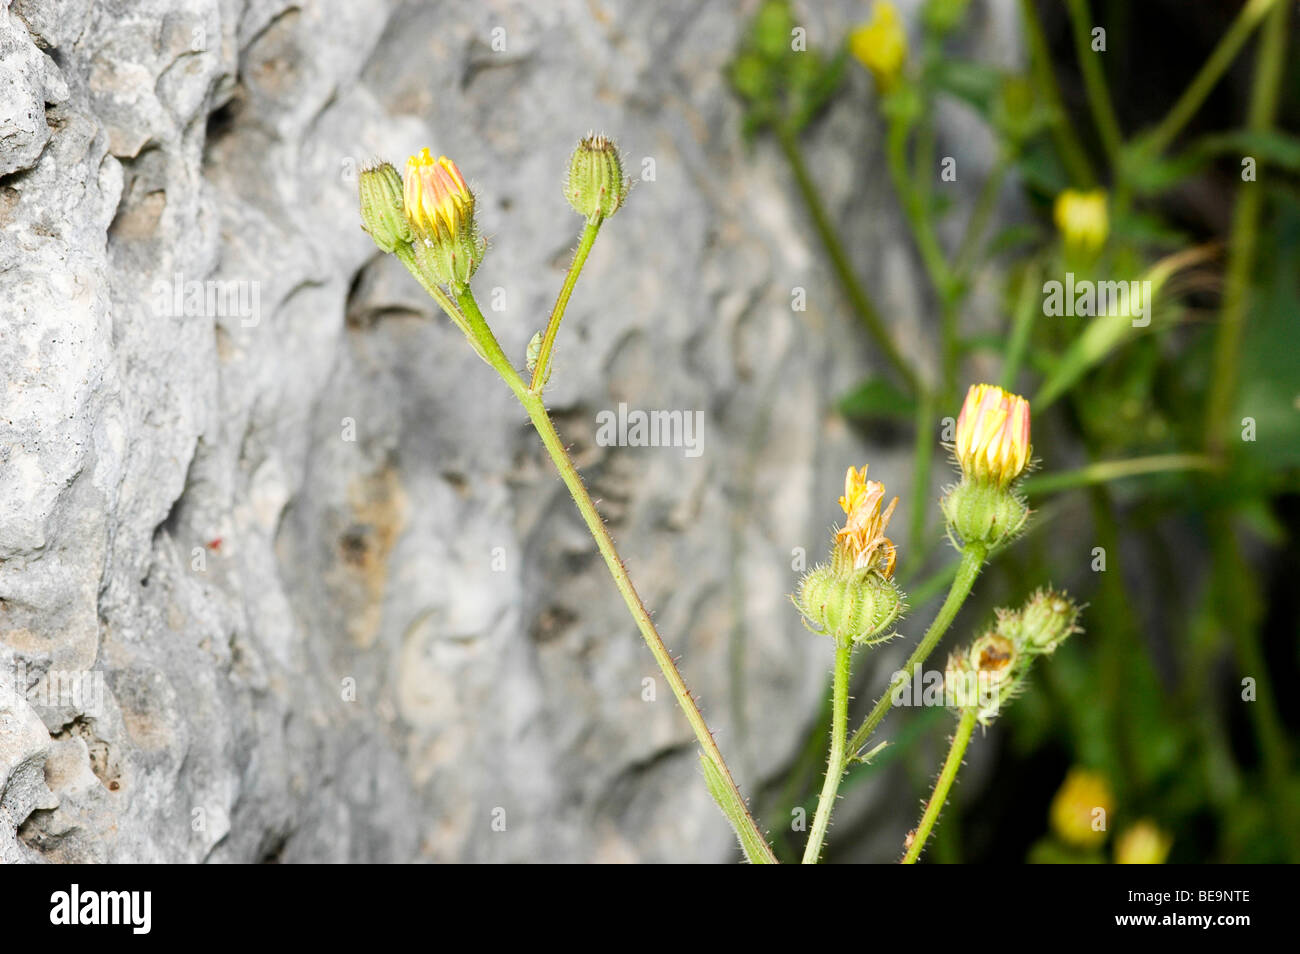 Israel, Prickly cupped Goat's Beard (Urospermum picroides) Stock Photo